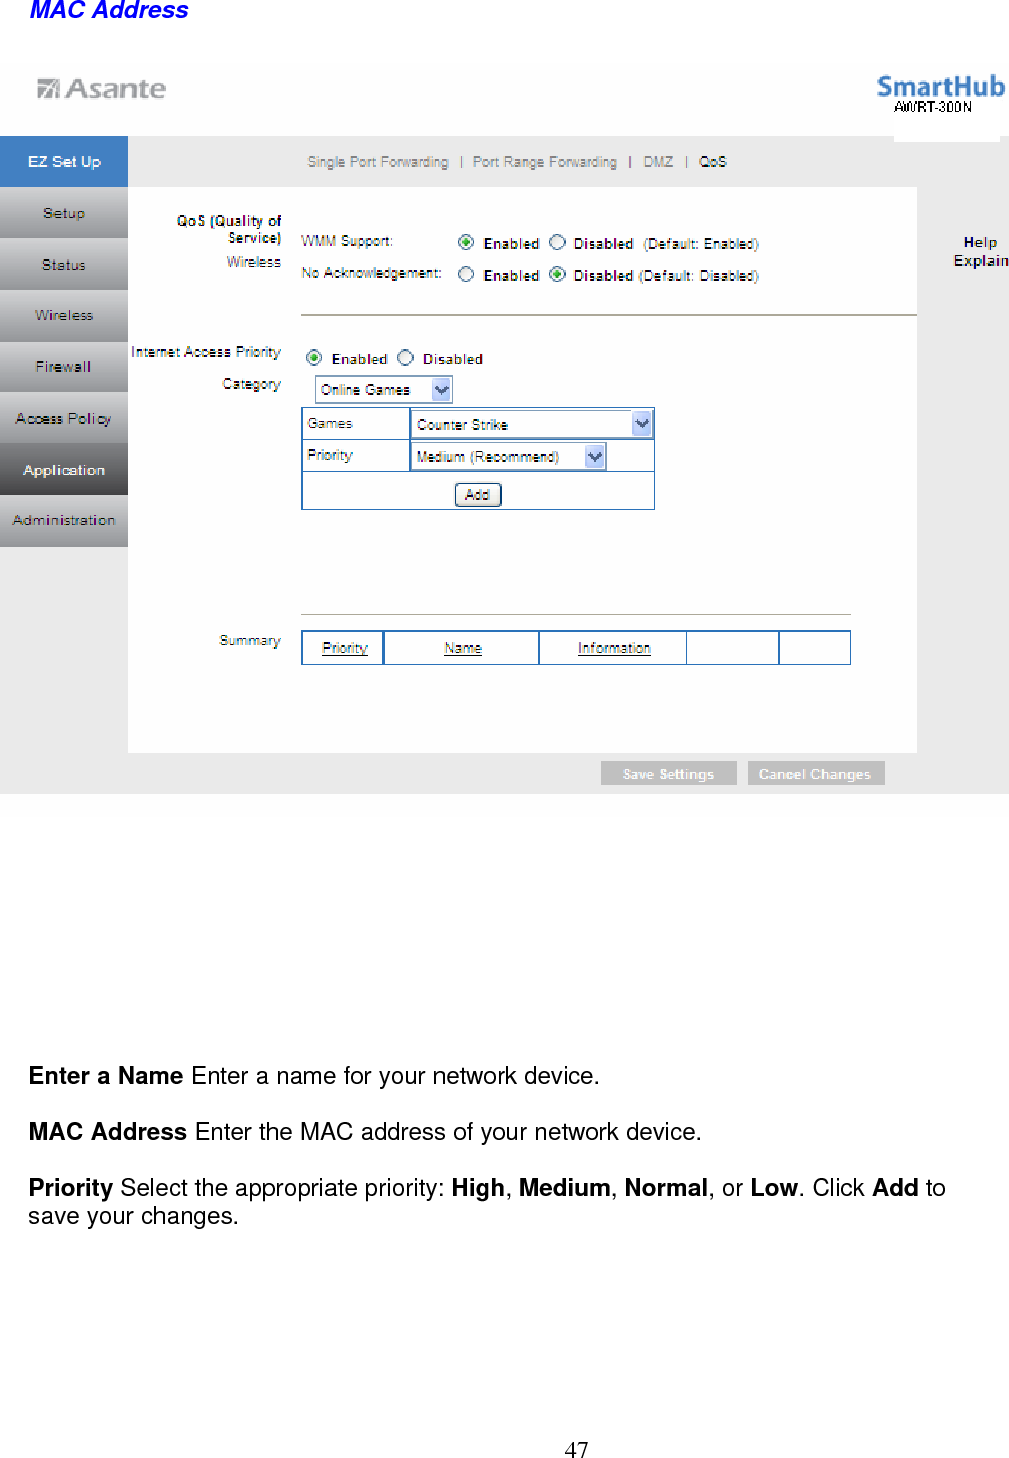  47MAC Address  Enter a Name Enter a name for your network device. MAC Address Enter the MAC address of your network device. Priority Select the appropriate priority: High, Medium, Normal, or Low. Click Add to save your changes.  